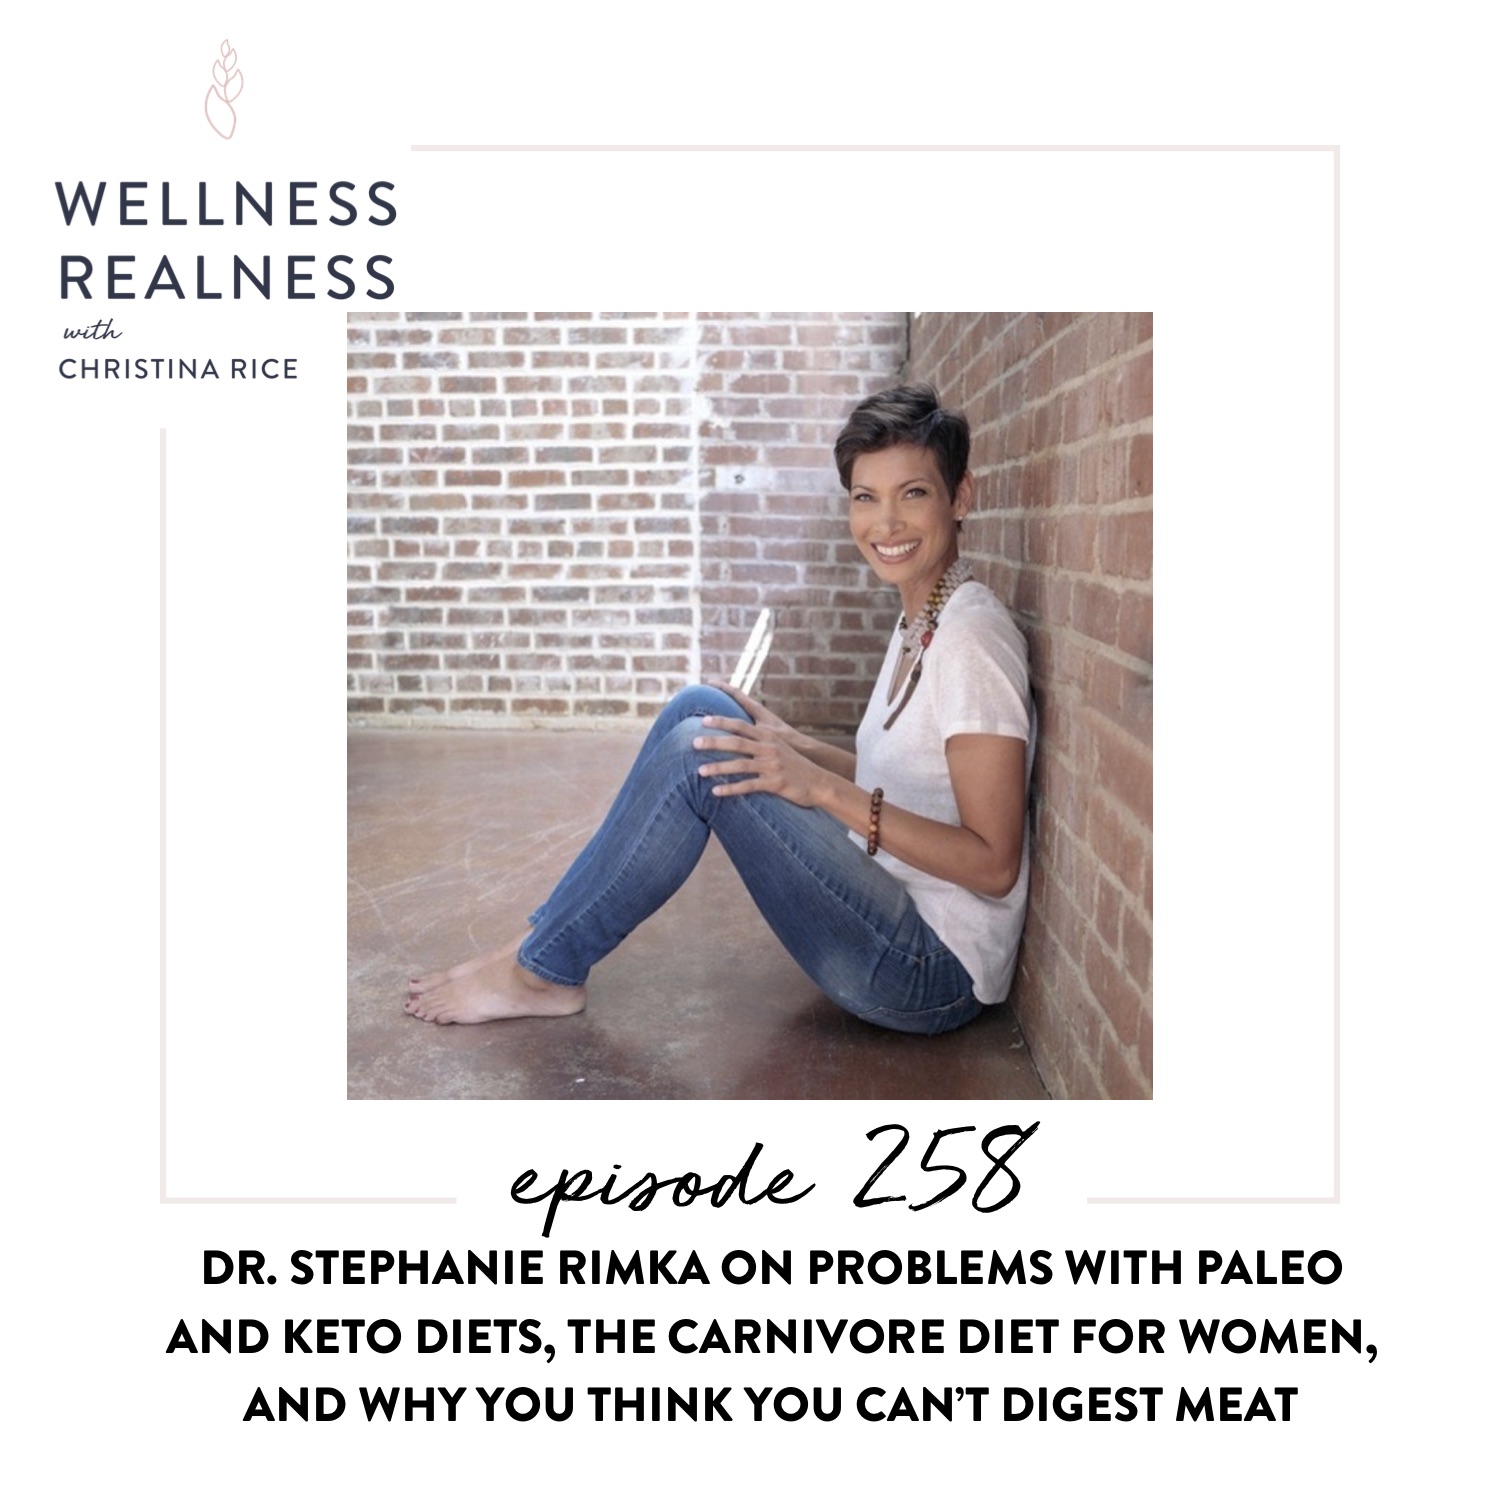 258: Dr. Stephanie Rimka on Problems with Paleo and Keto Diets, the Carnivore Diet for Women, and Why You Think You Can't Digest Meat